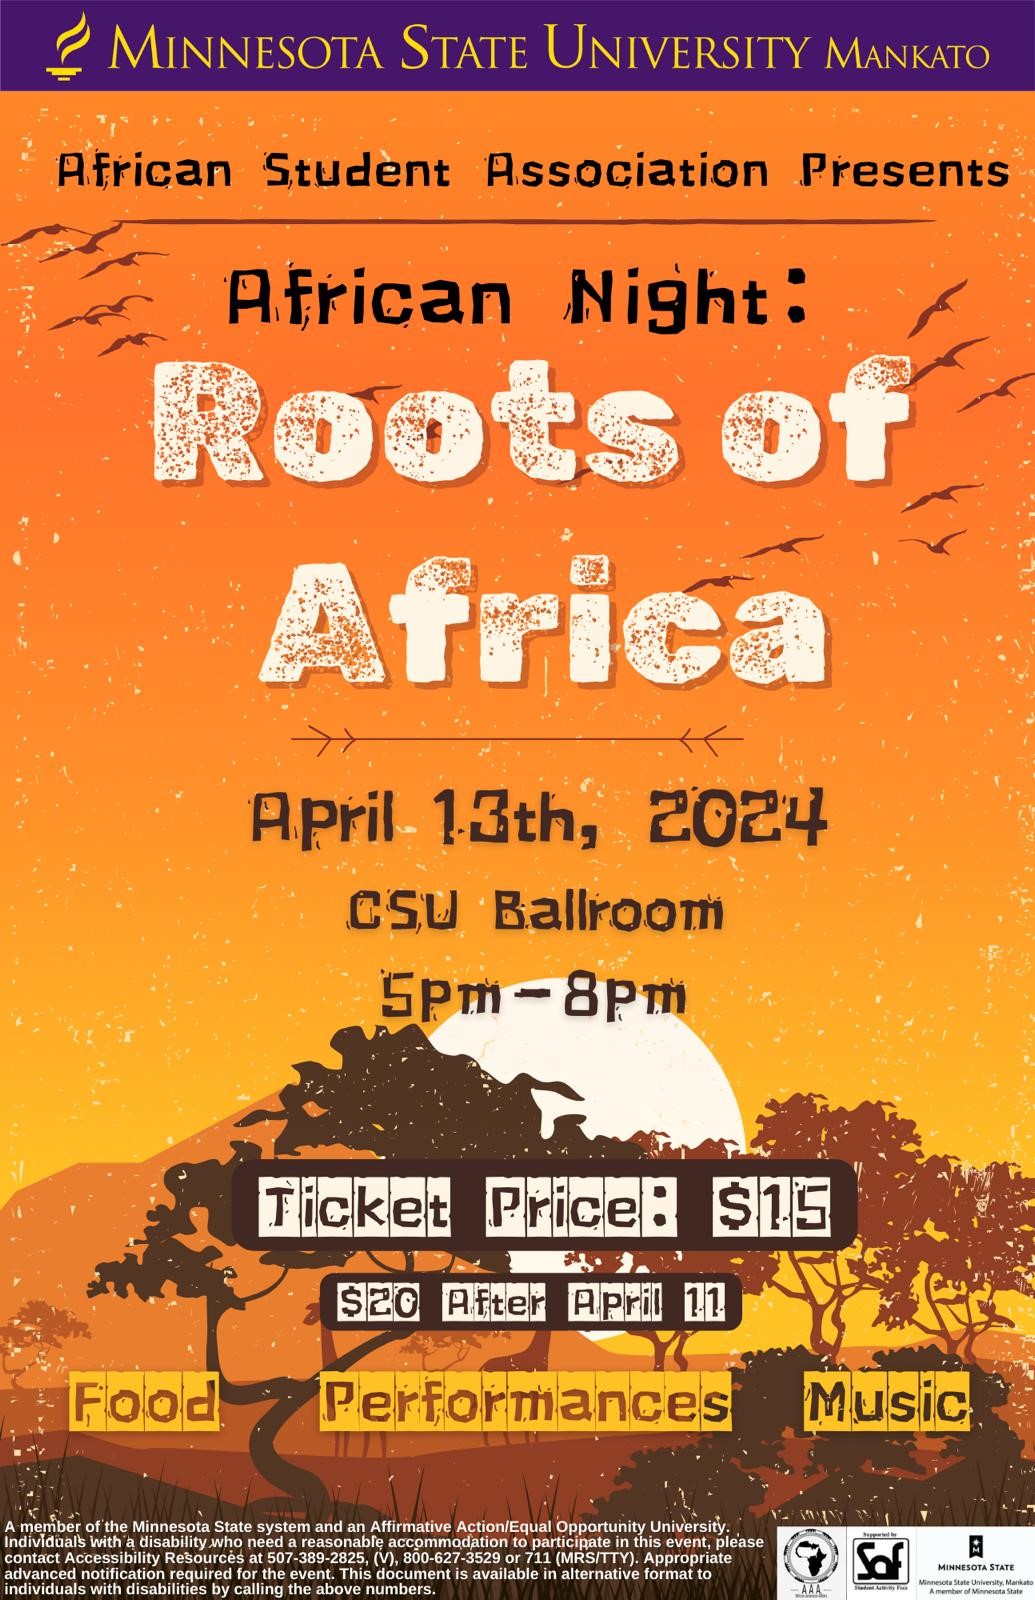 Minnesota State University, Mankato African Student Association Presents African Night: Roots of Africa April - 13th, 2024 CSU Ballroom 5Pm-8Pm Ticket Price: $15 and $20 After April 11 Food Performances Music